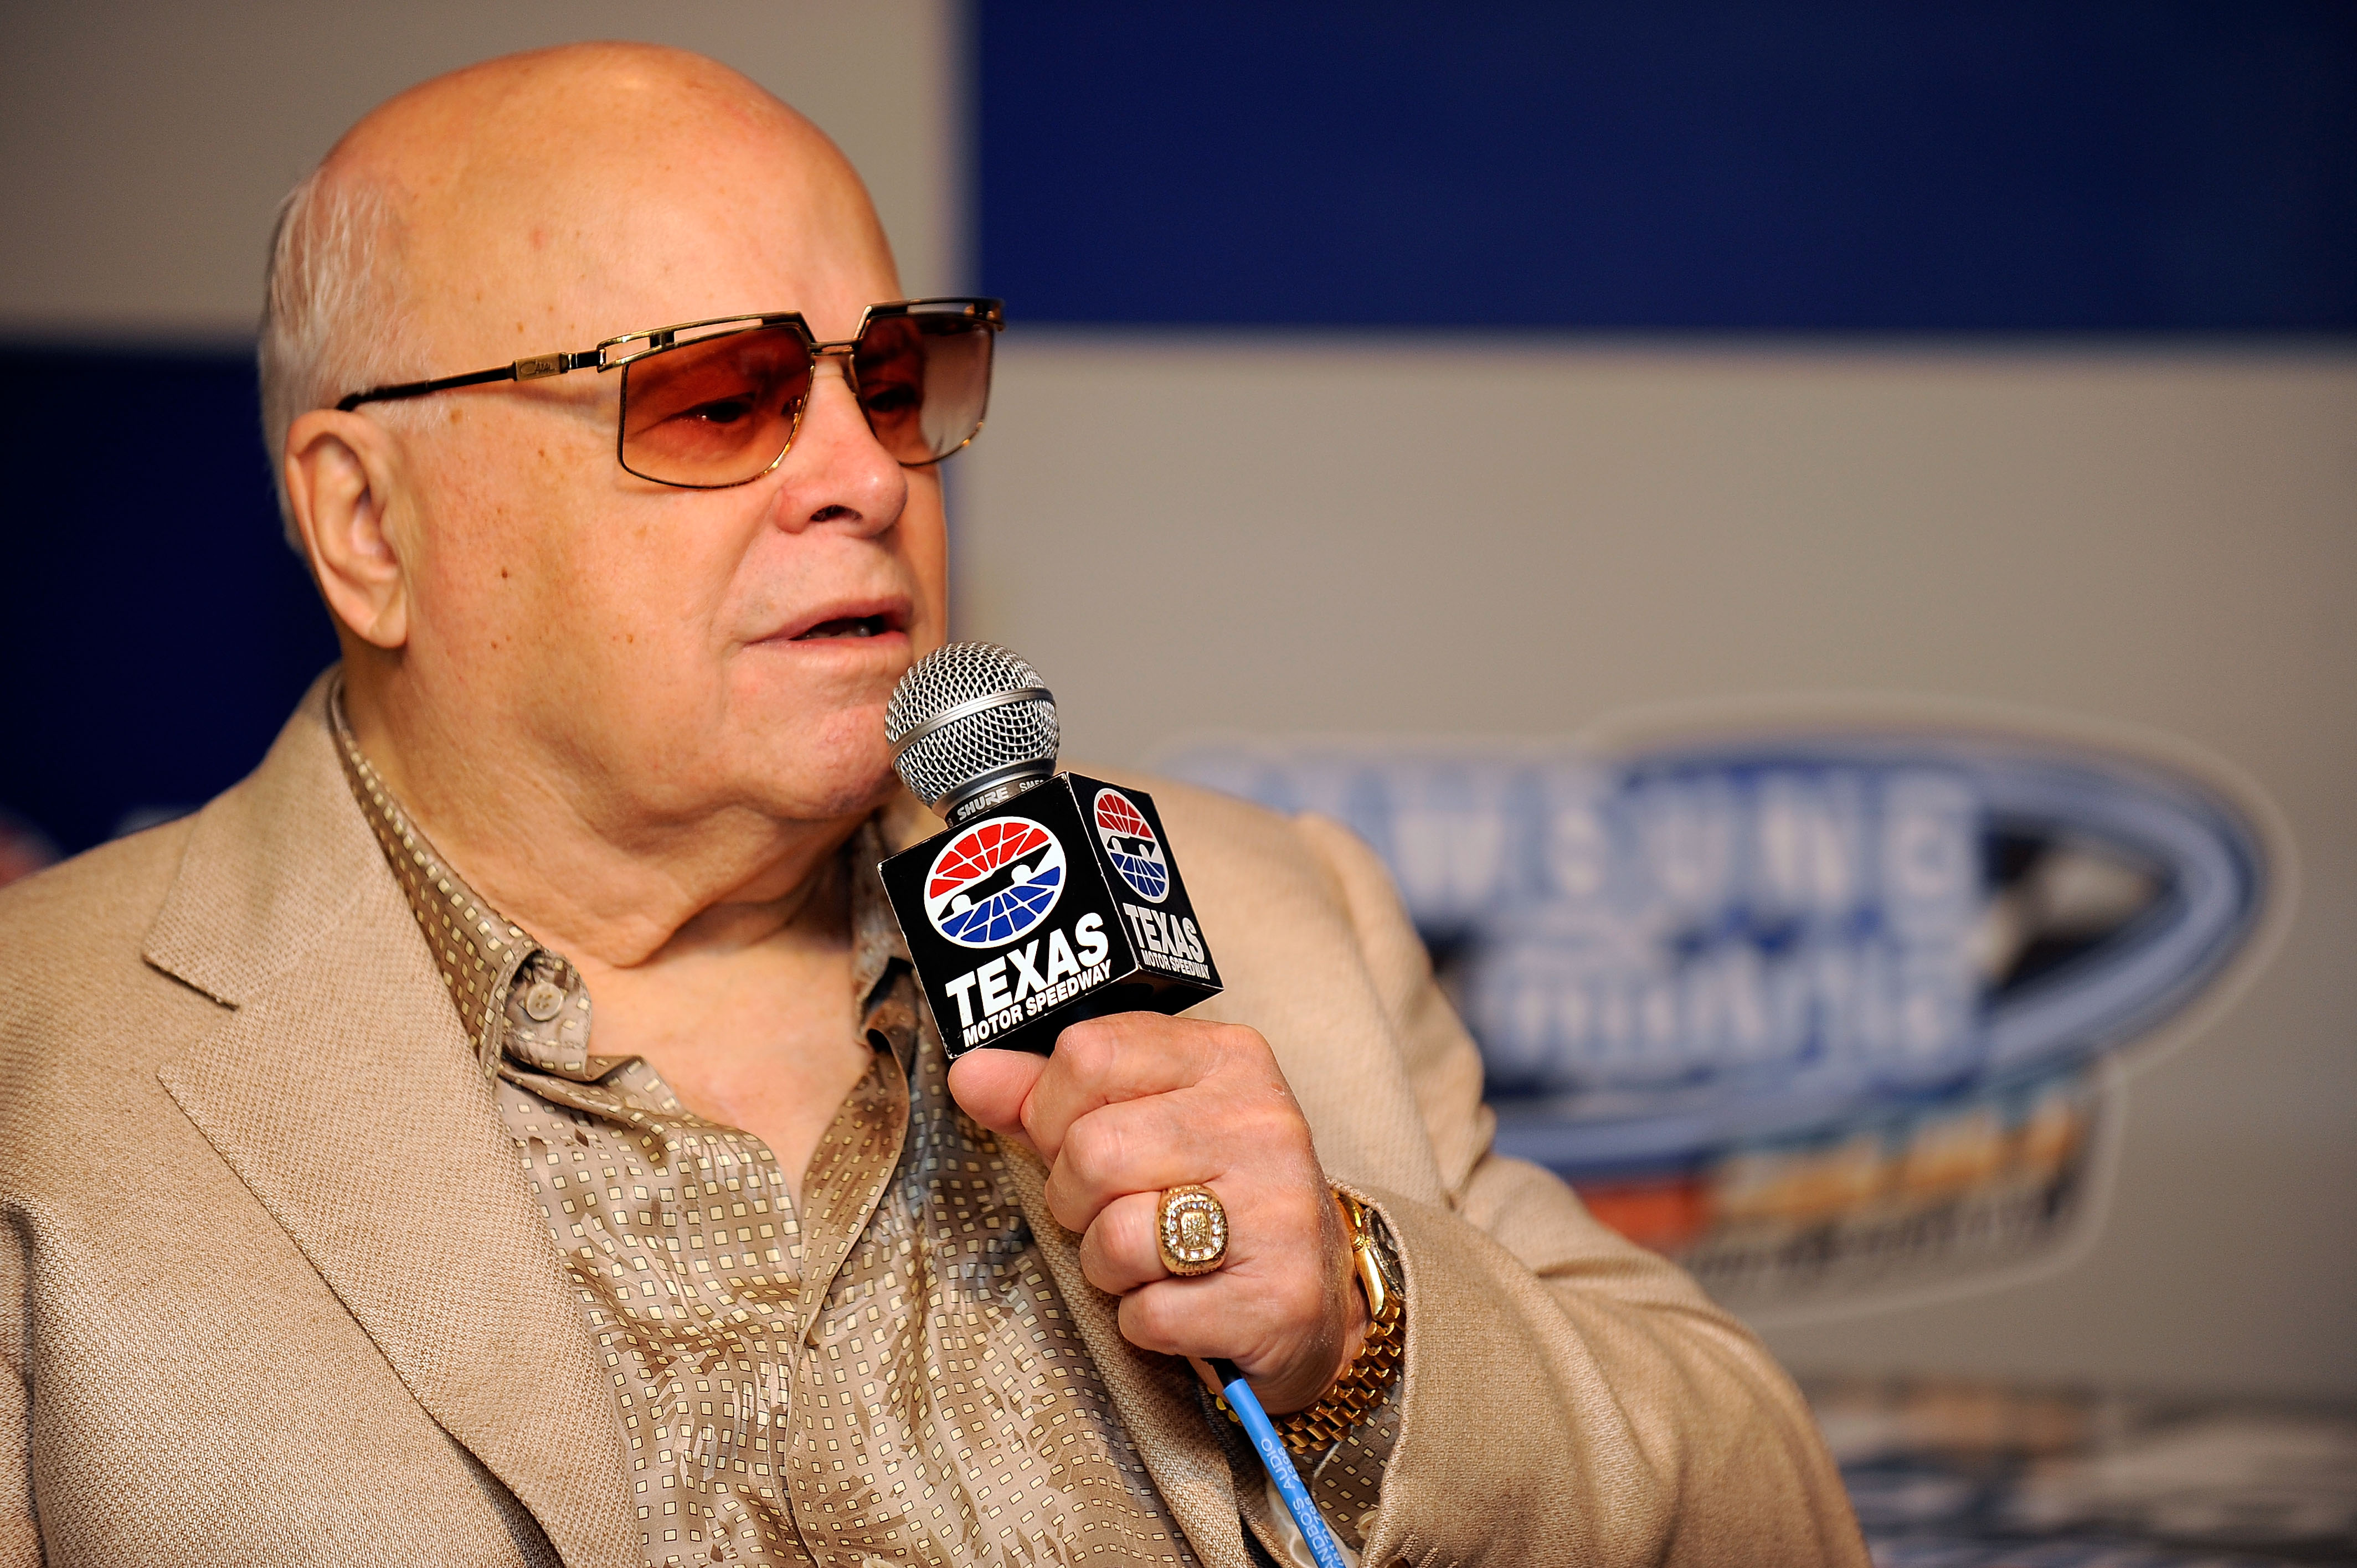 FORT WORTH, TX - APRIL 16:  Speedway Motorsports Inc. owner/CEO Bruton Smith speaks to the media during a press conference at Texas Motor Speedway on April 16, 2010 in Fort Worth, Texas.  (Photo by Rusty Jarrett/Getty Images for NASCAR)